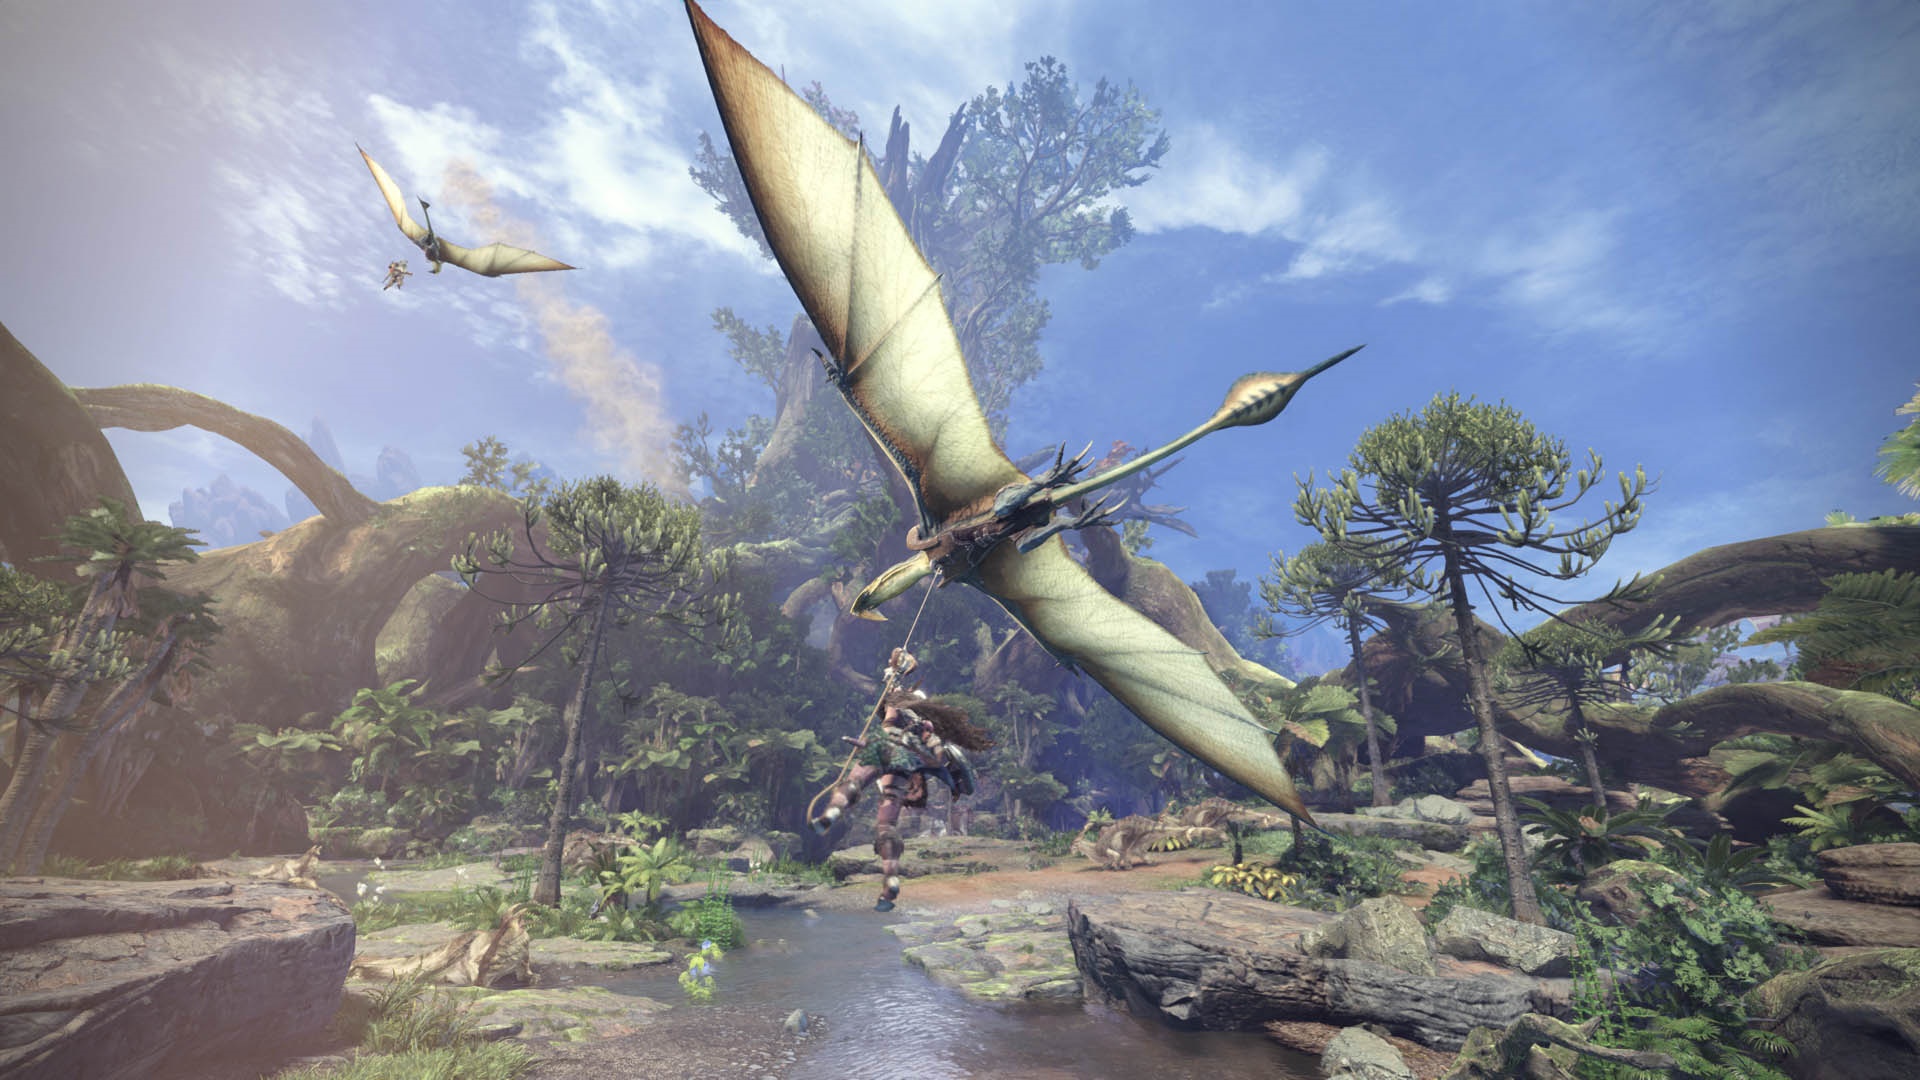 Best games like Monster Hunter: World you can play on PC